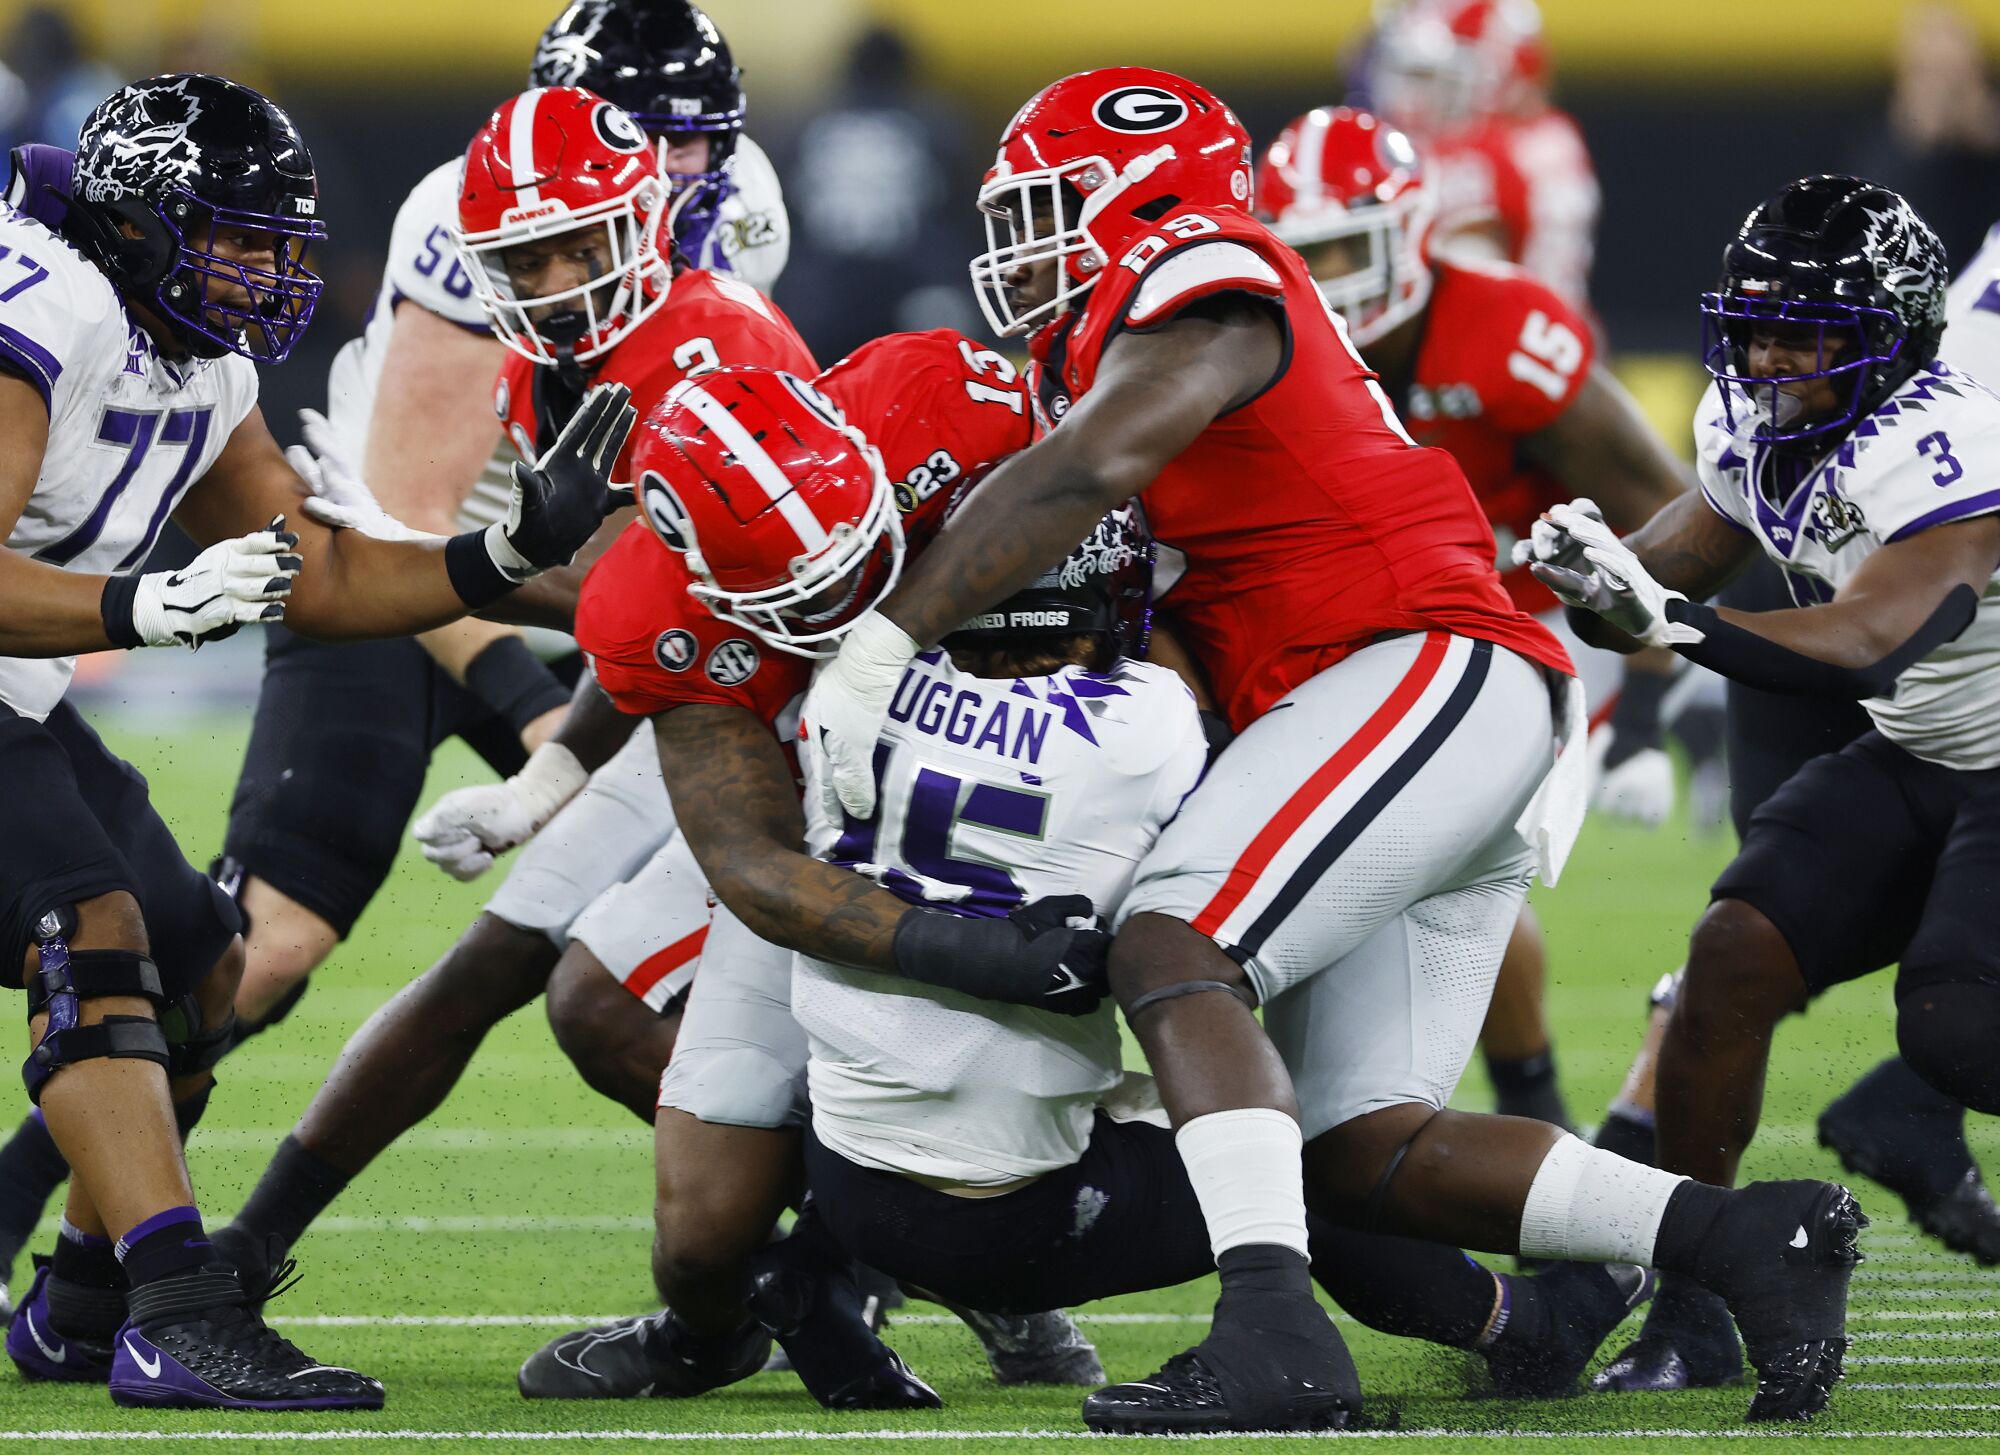 Defending national champion pounds TCU in college football